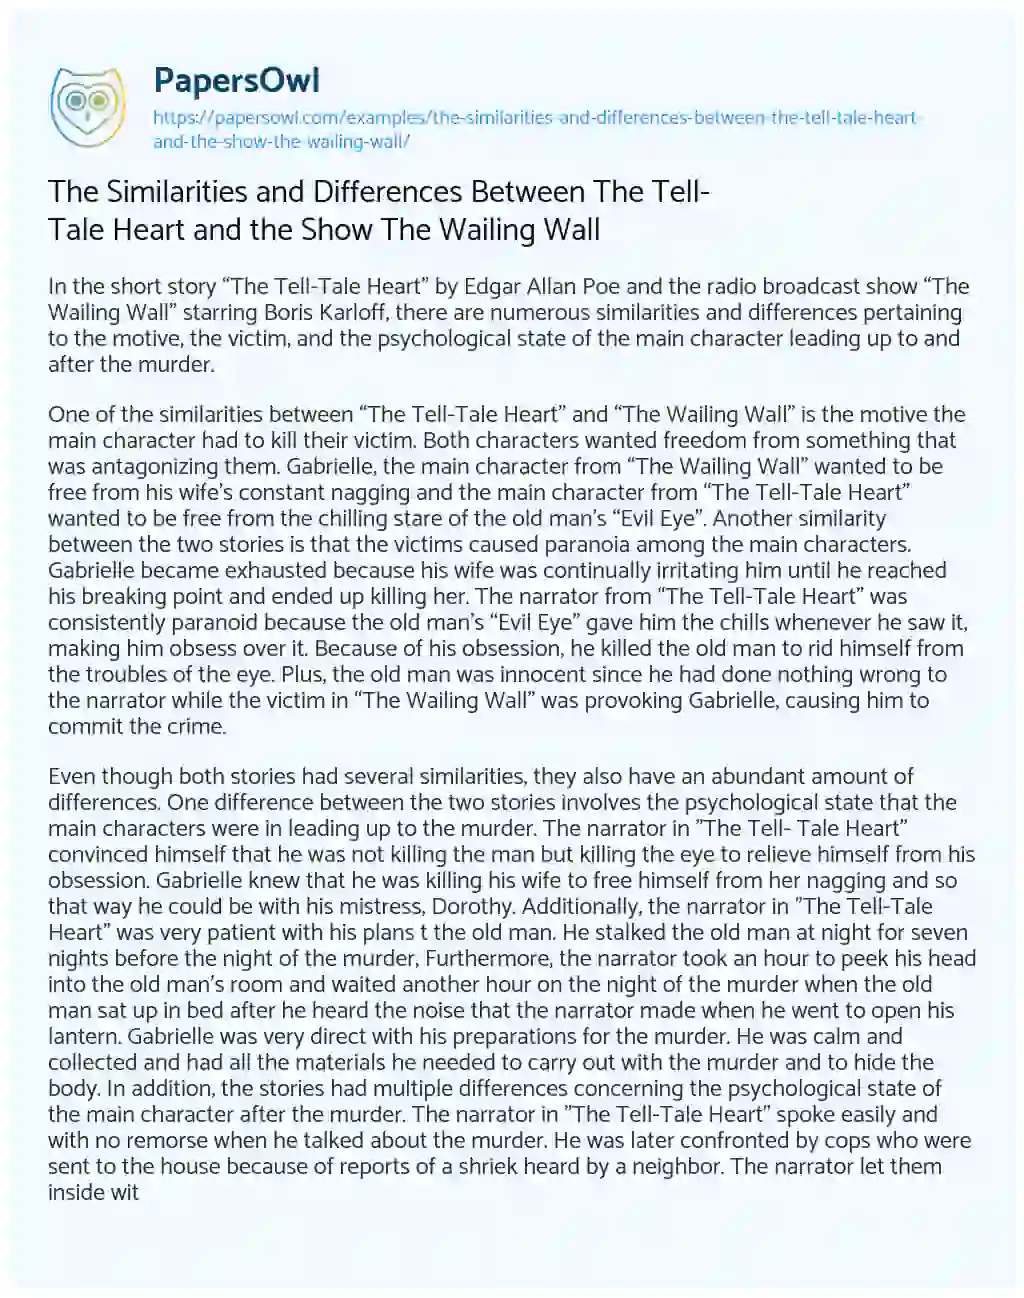 Essay on The Similarities and Differences between the Tell-Tale Heart and the Show the Wailing Wall